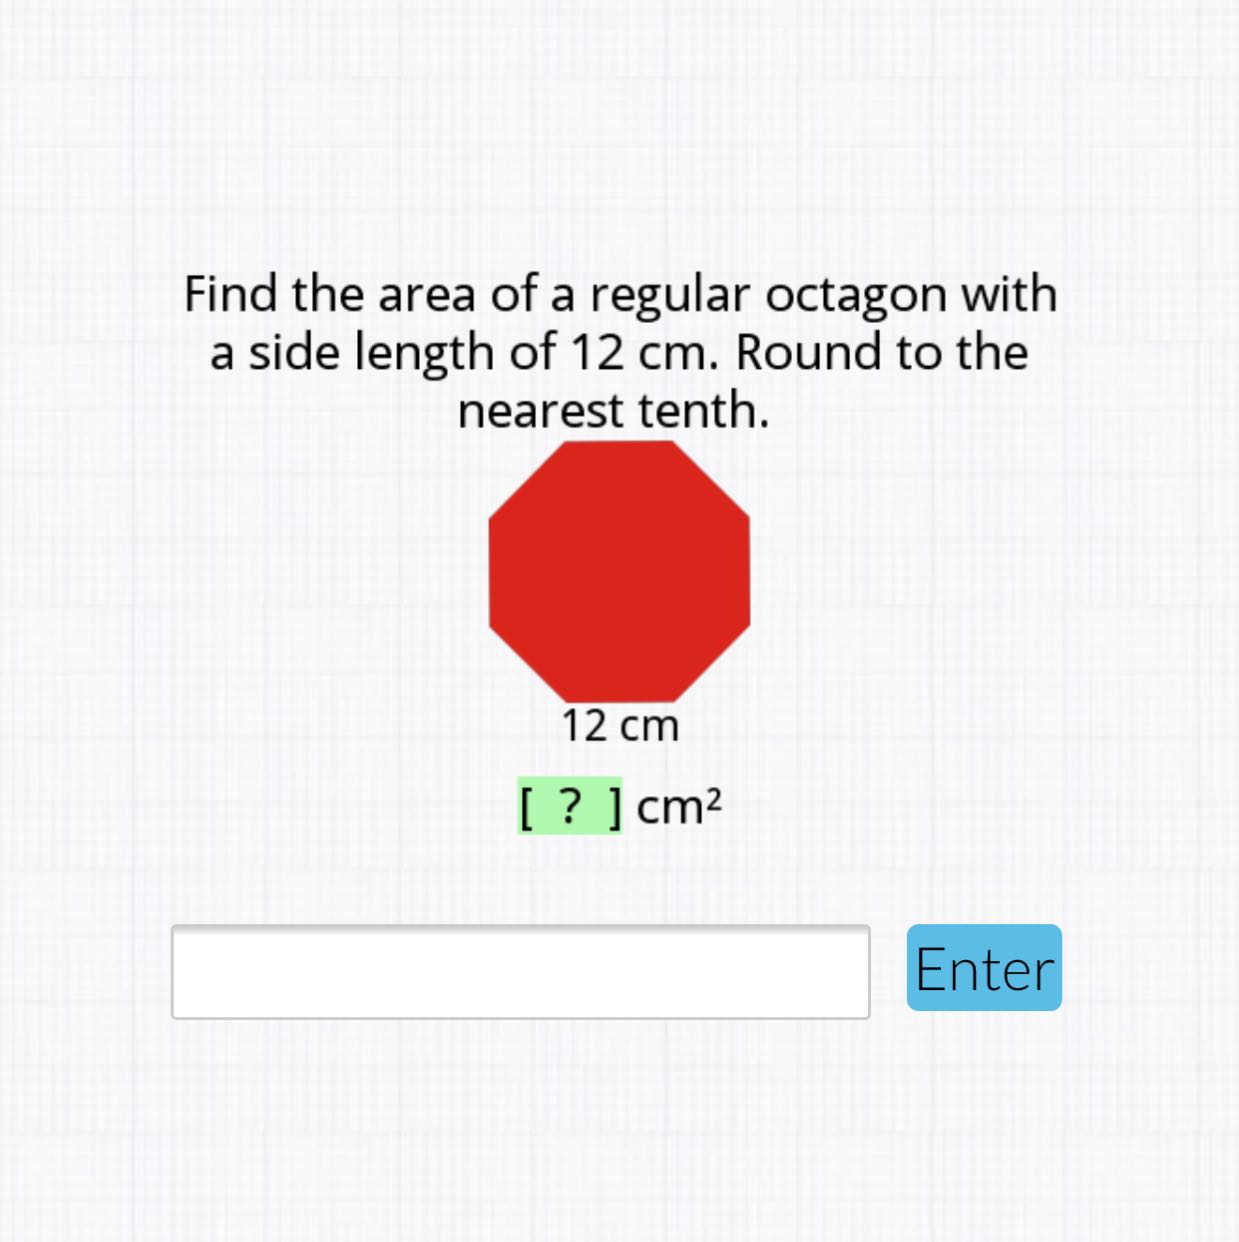 Find the area of a regular octagon with a side length of \( 12 \mathrm{~cm} \). Round to the nearest tenth.

Enter